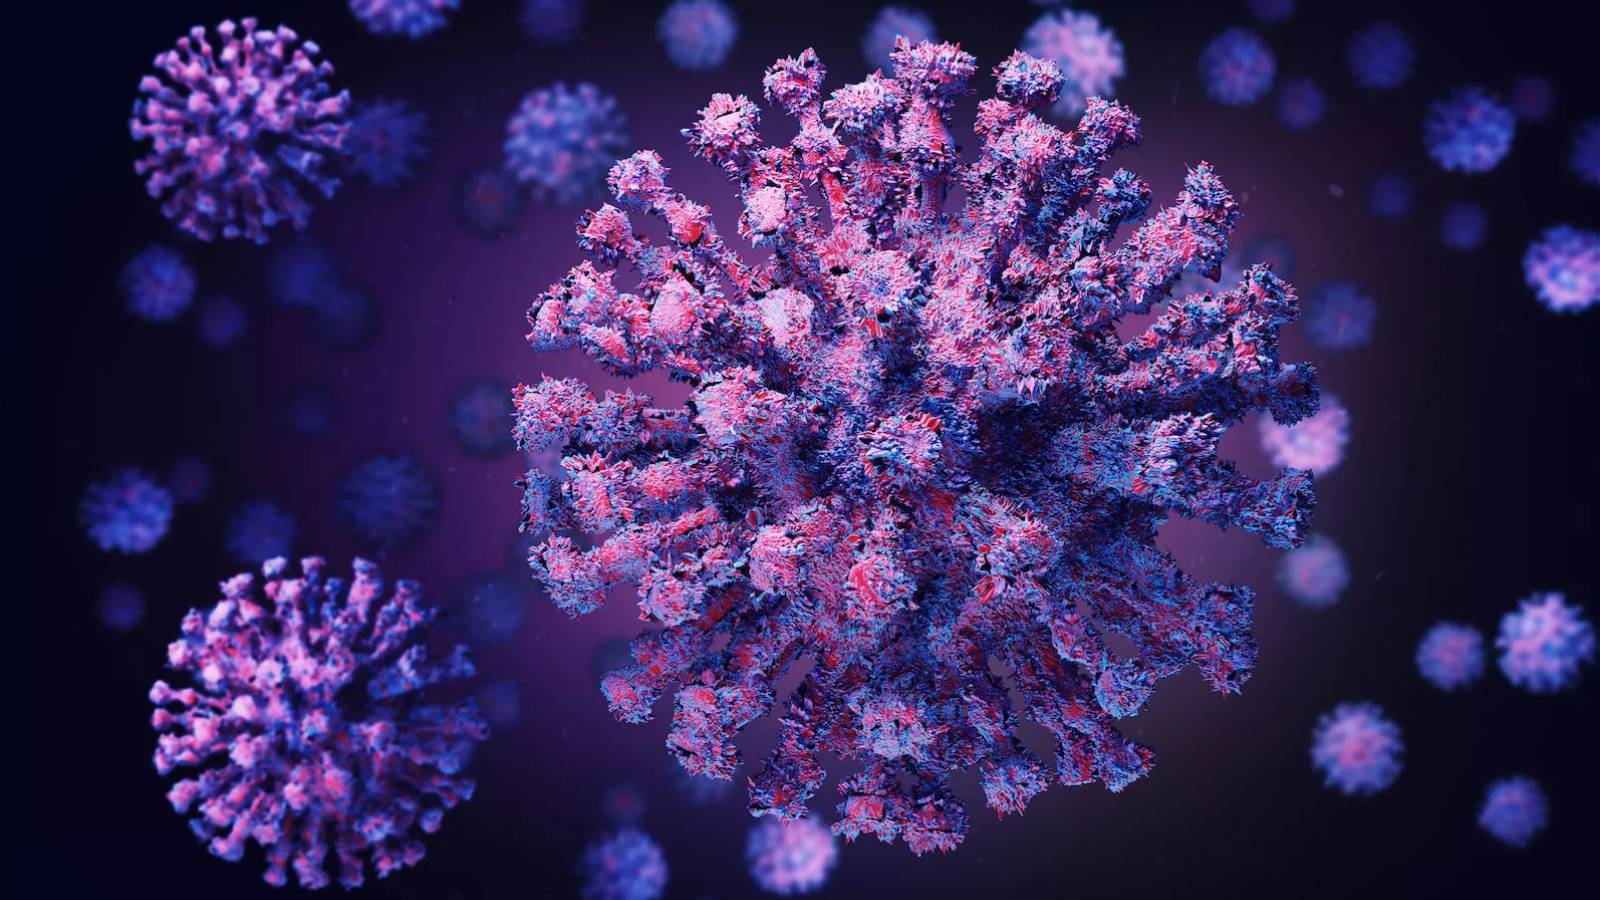 Coronavirus Images Lungs Affected Severe Forms